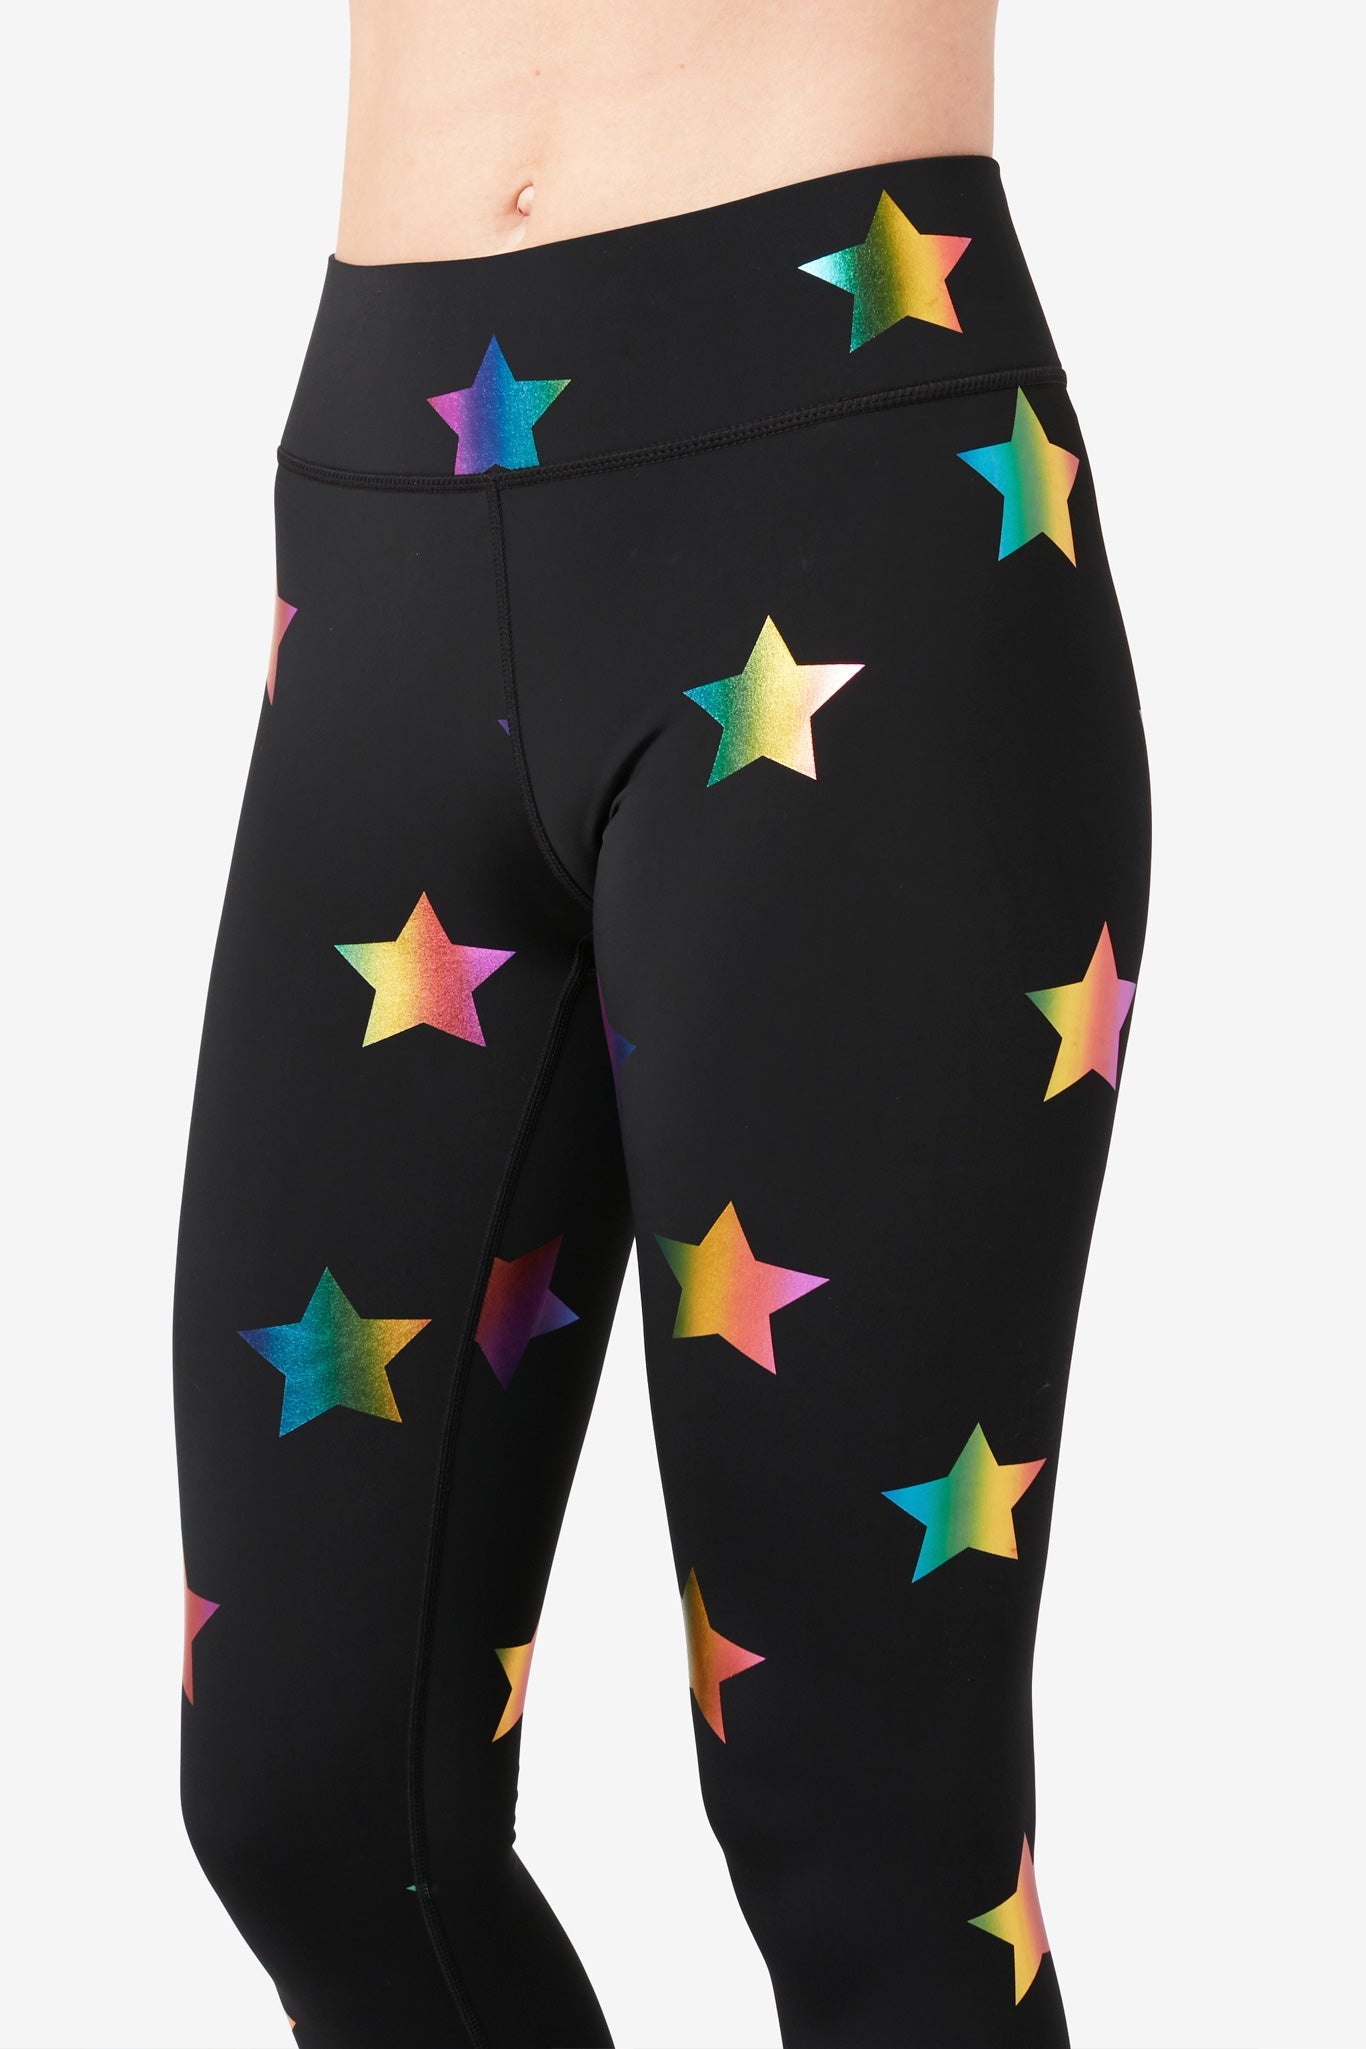 UpLift Leggings in Black Rainbow Star Foil with Tall Band –